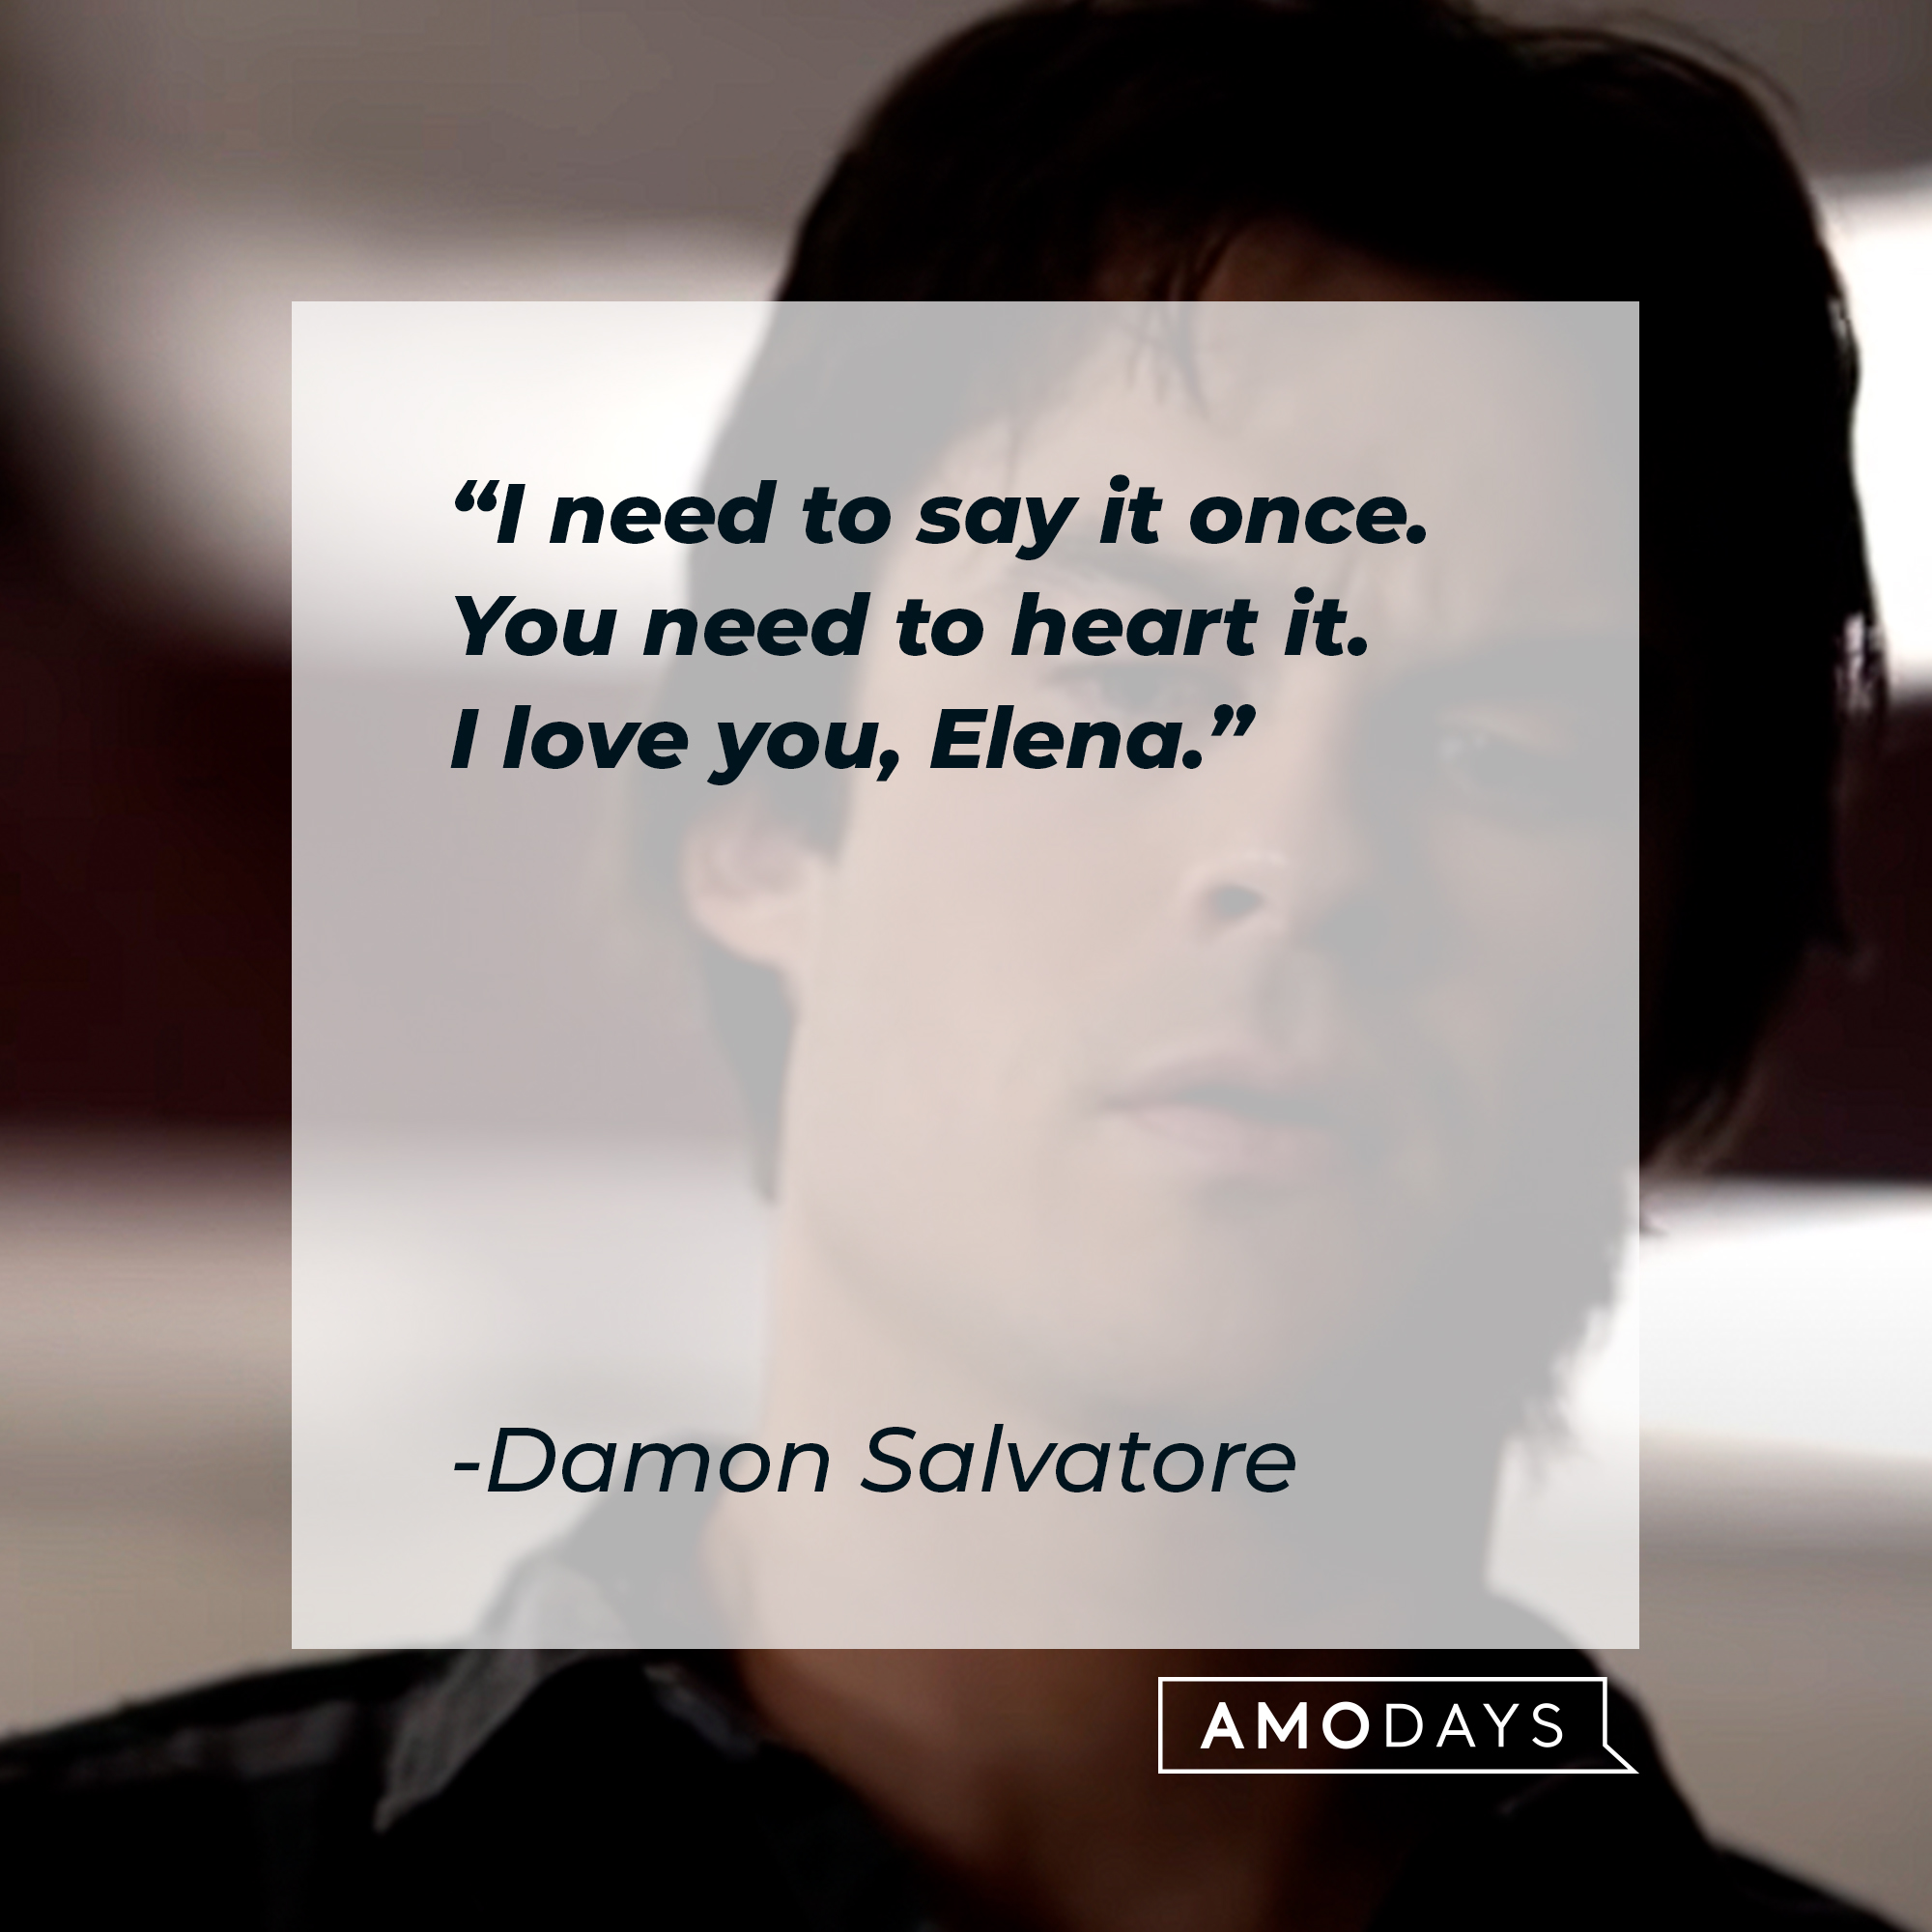 Damon's Salvatore's quote: "I need to say it once. You need to heart it. I love you, Elena" | Source: youtube.com/stillwatchingnetflix